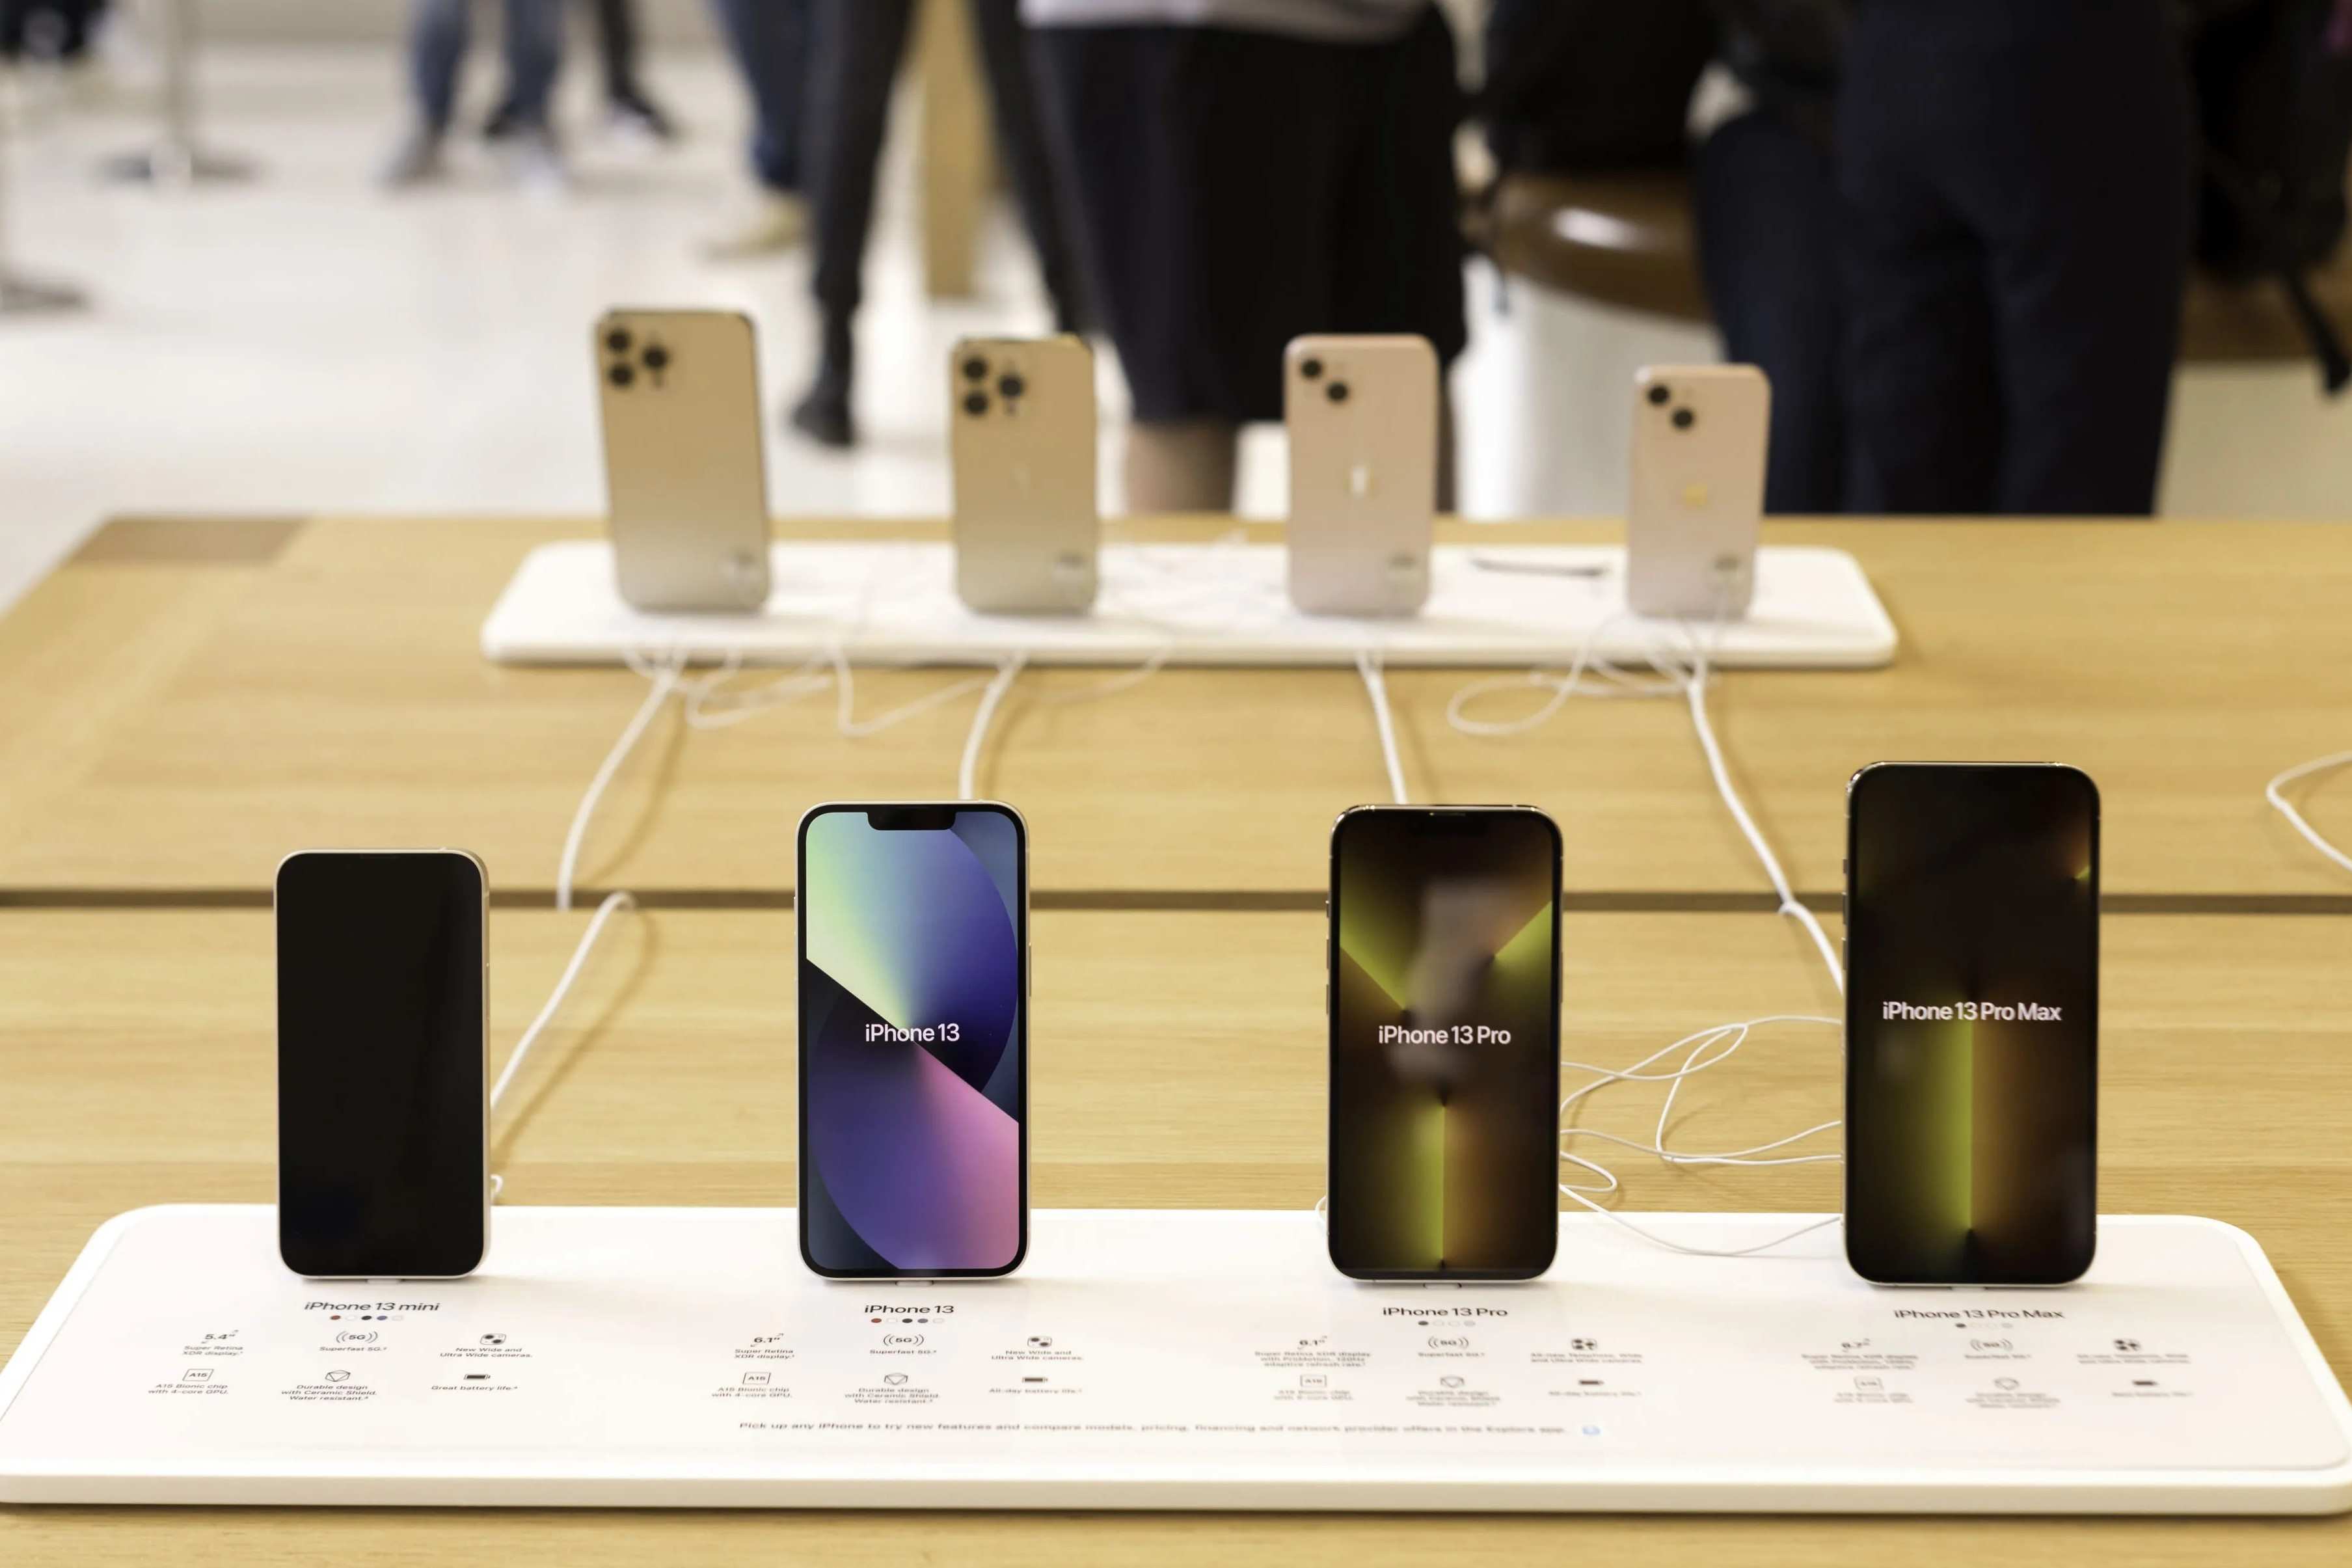 Apple’s Sales Strategy: Understanding IPhone 13 Pro Availability